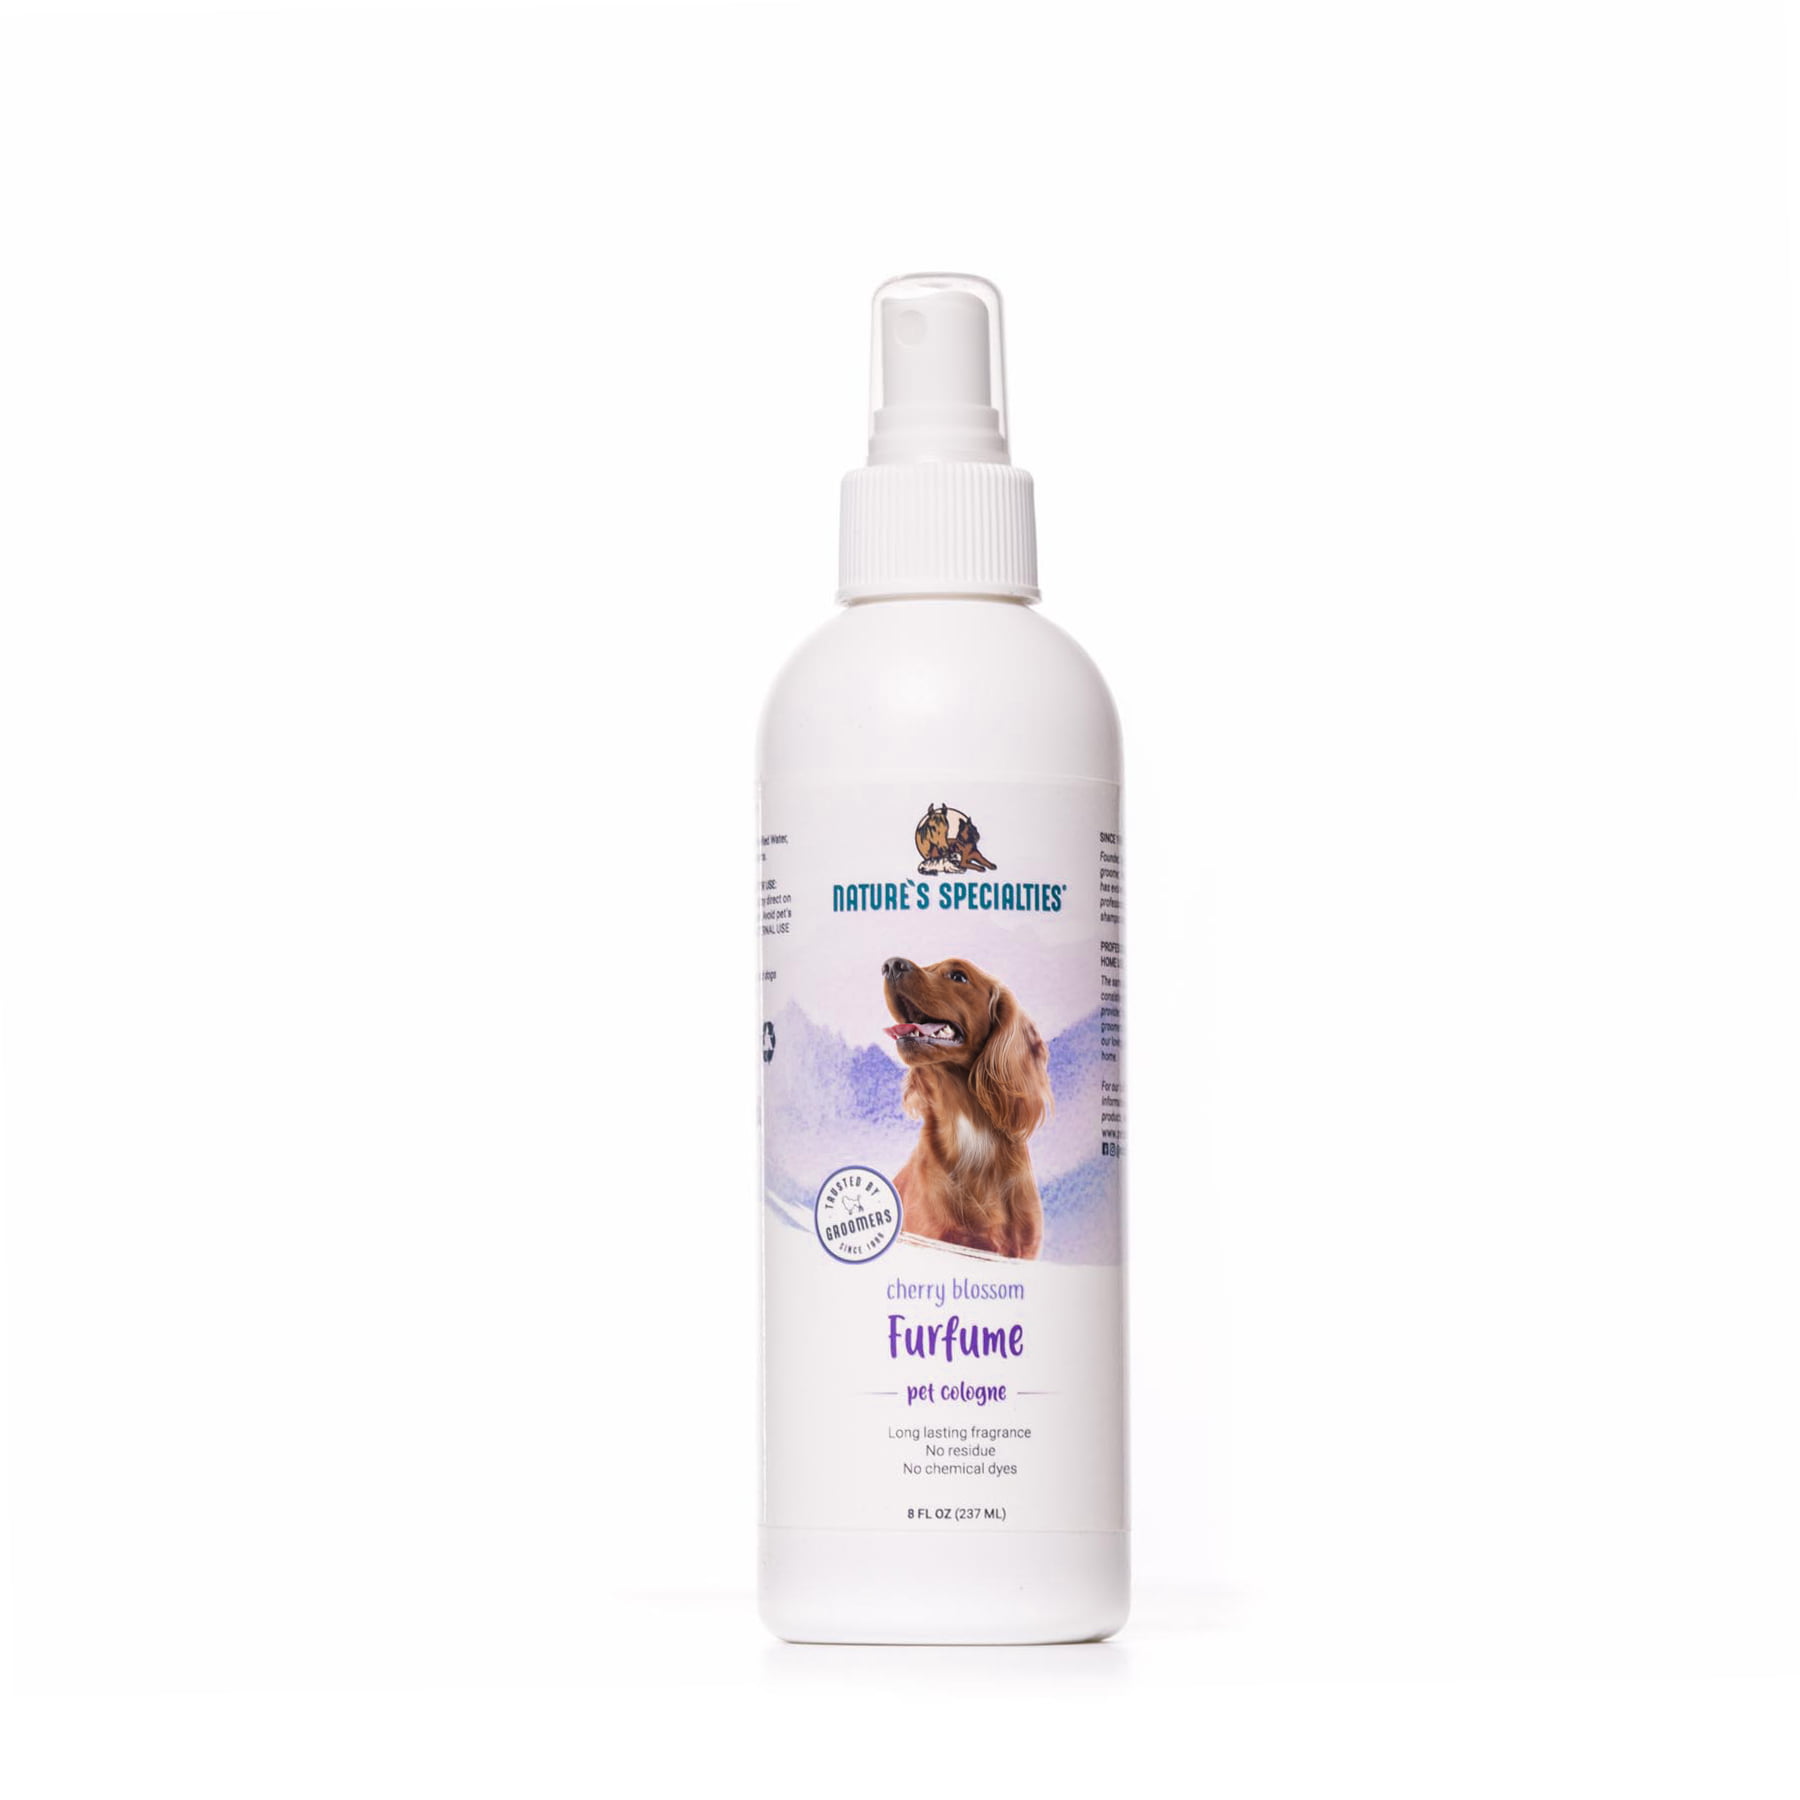 mink oil shampoo for dogs